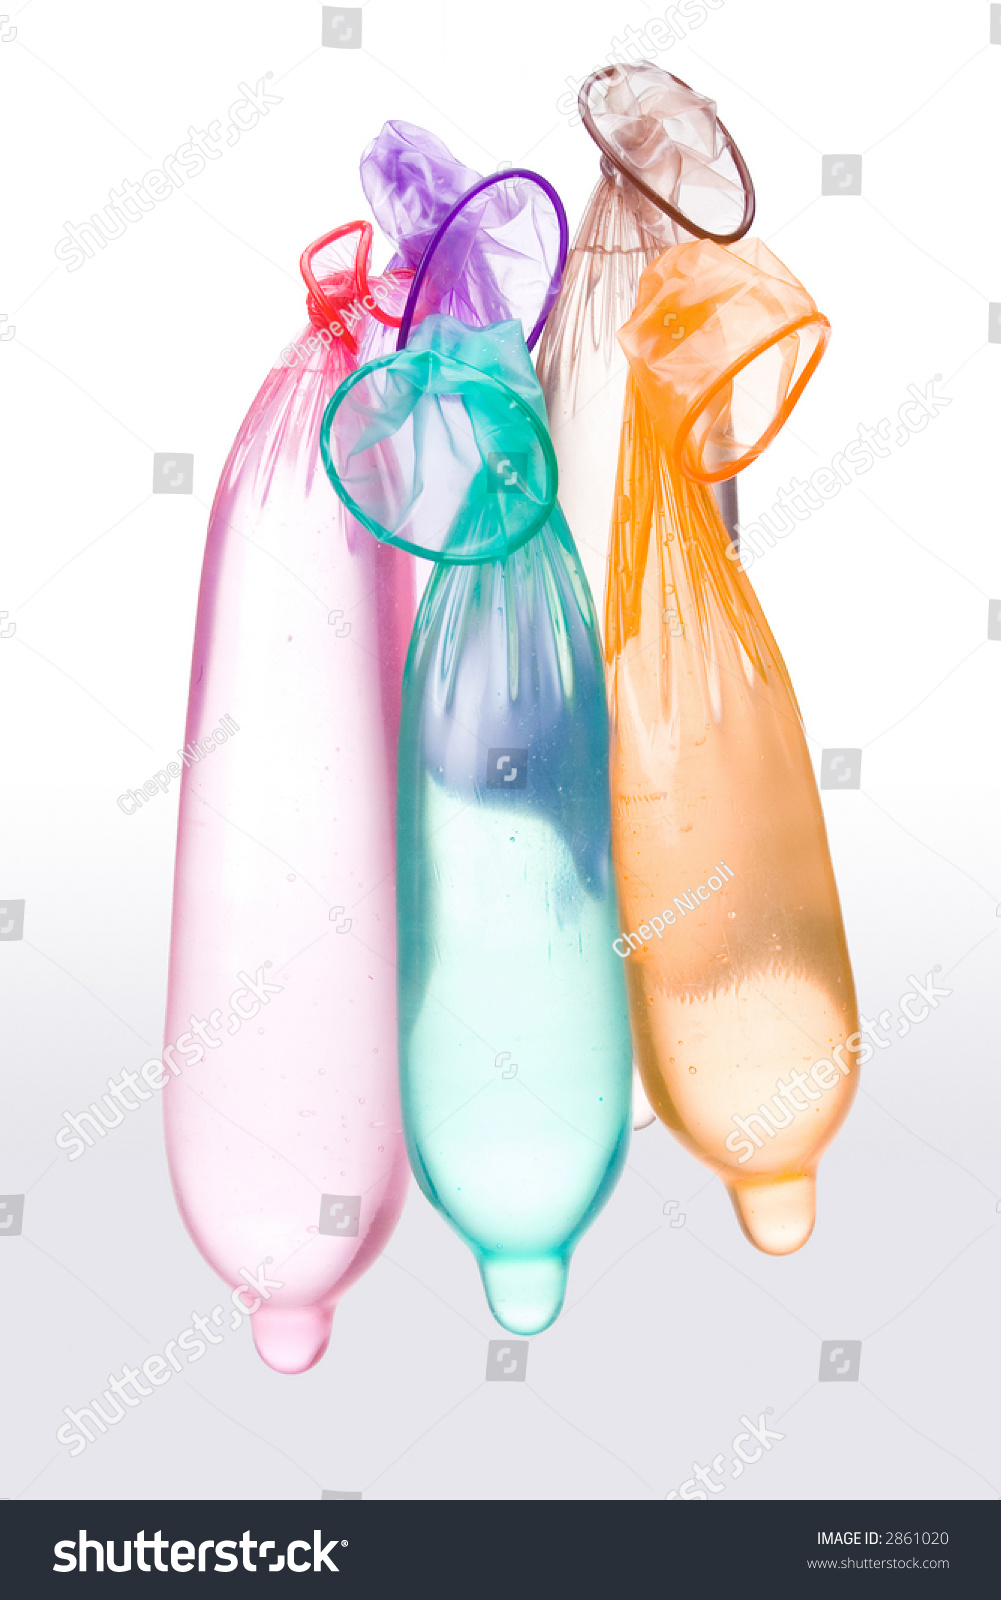 https://image.shutterstock.com/shutterstock/photos/2861020/display_1500/stock-photo-several-color-condoms-filled-with-water-2861020.jpg